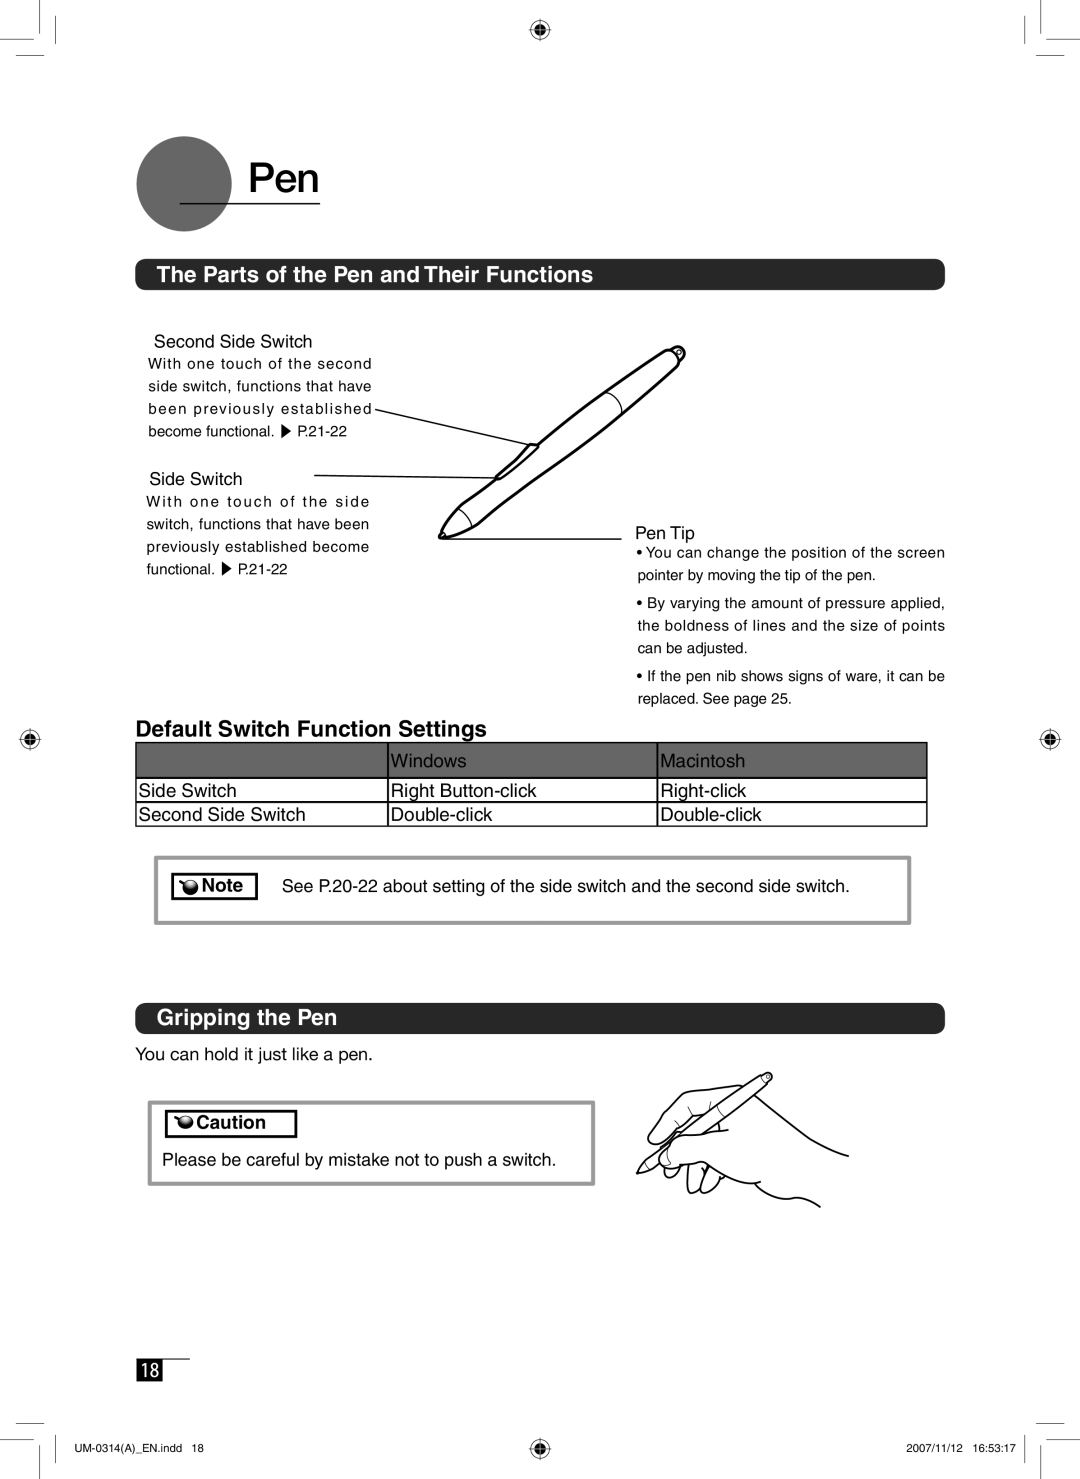 Wacom DTI-520 manual The Parts of the Pen and Their Functions, Gripping the Pen, 18 